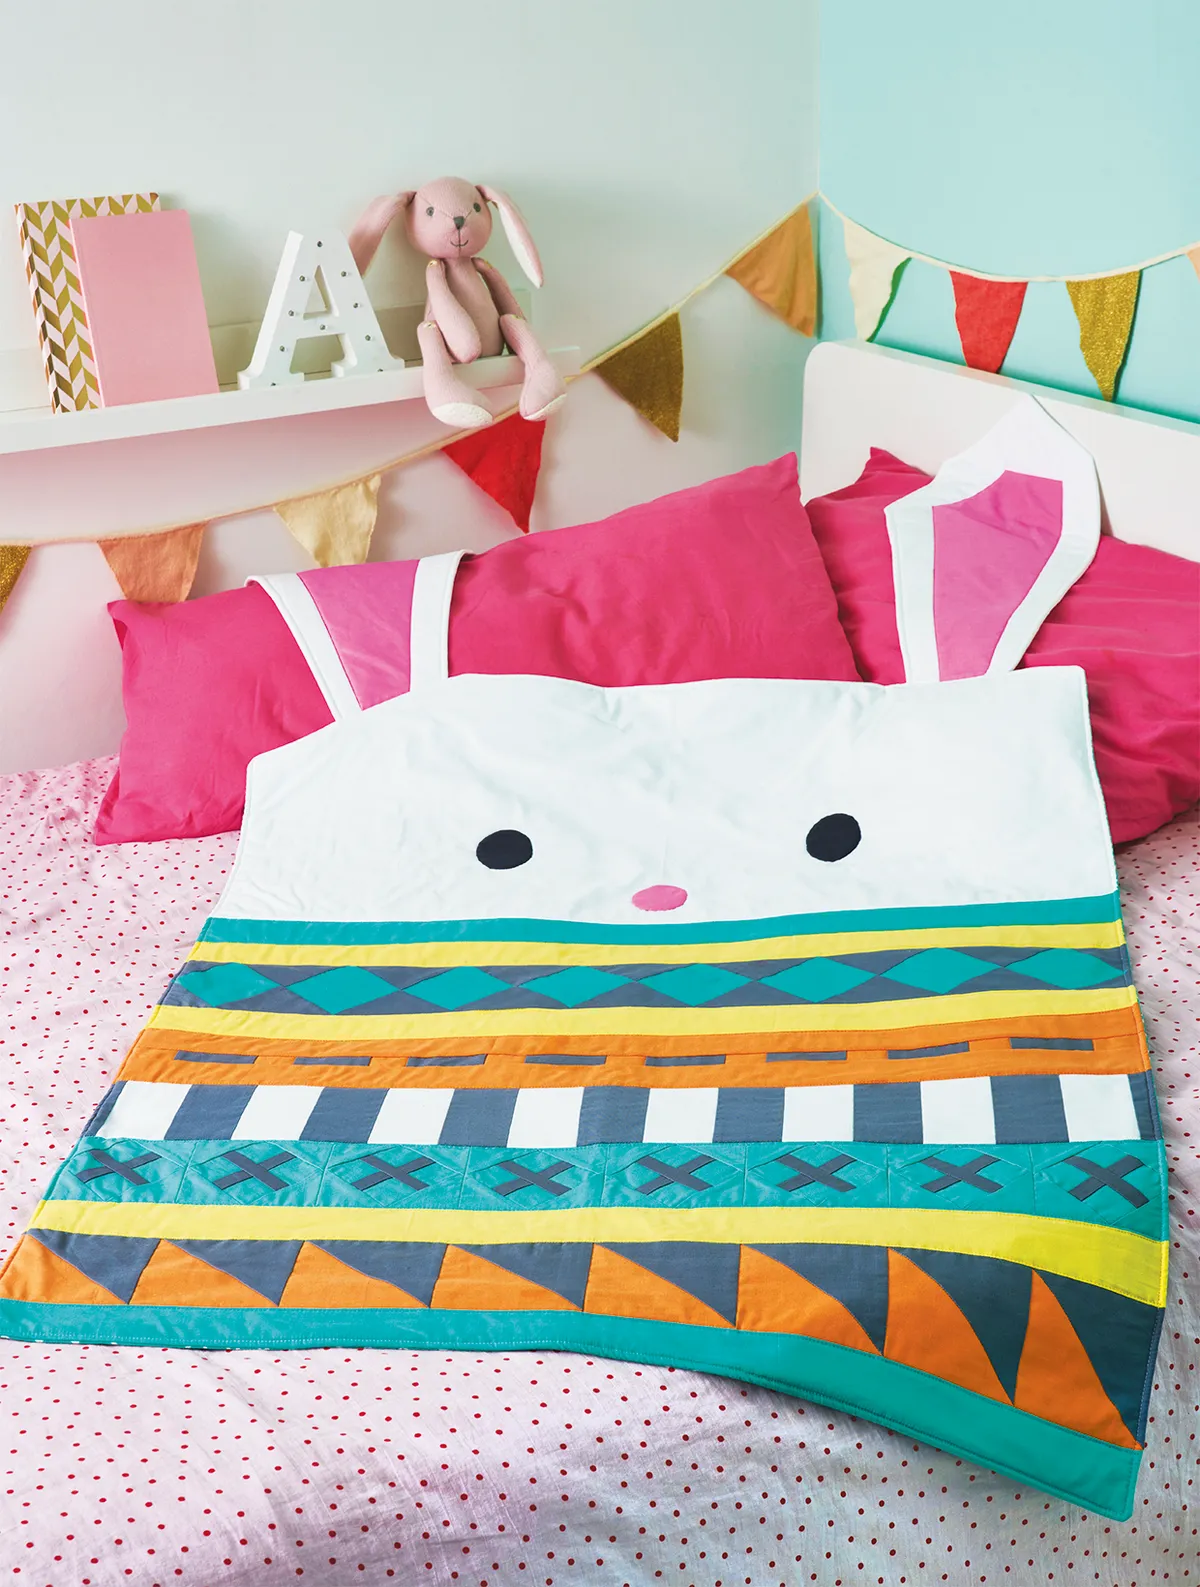 Free bunny quilt pattern